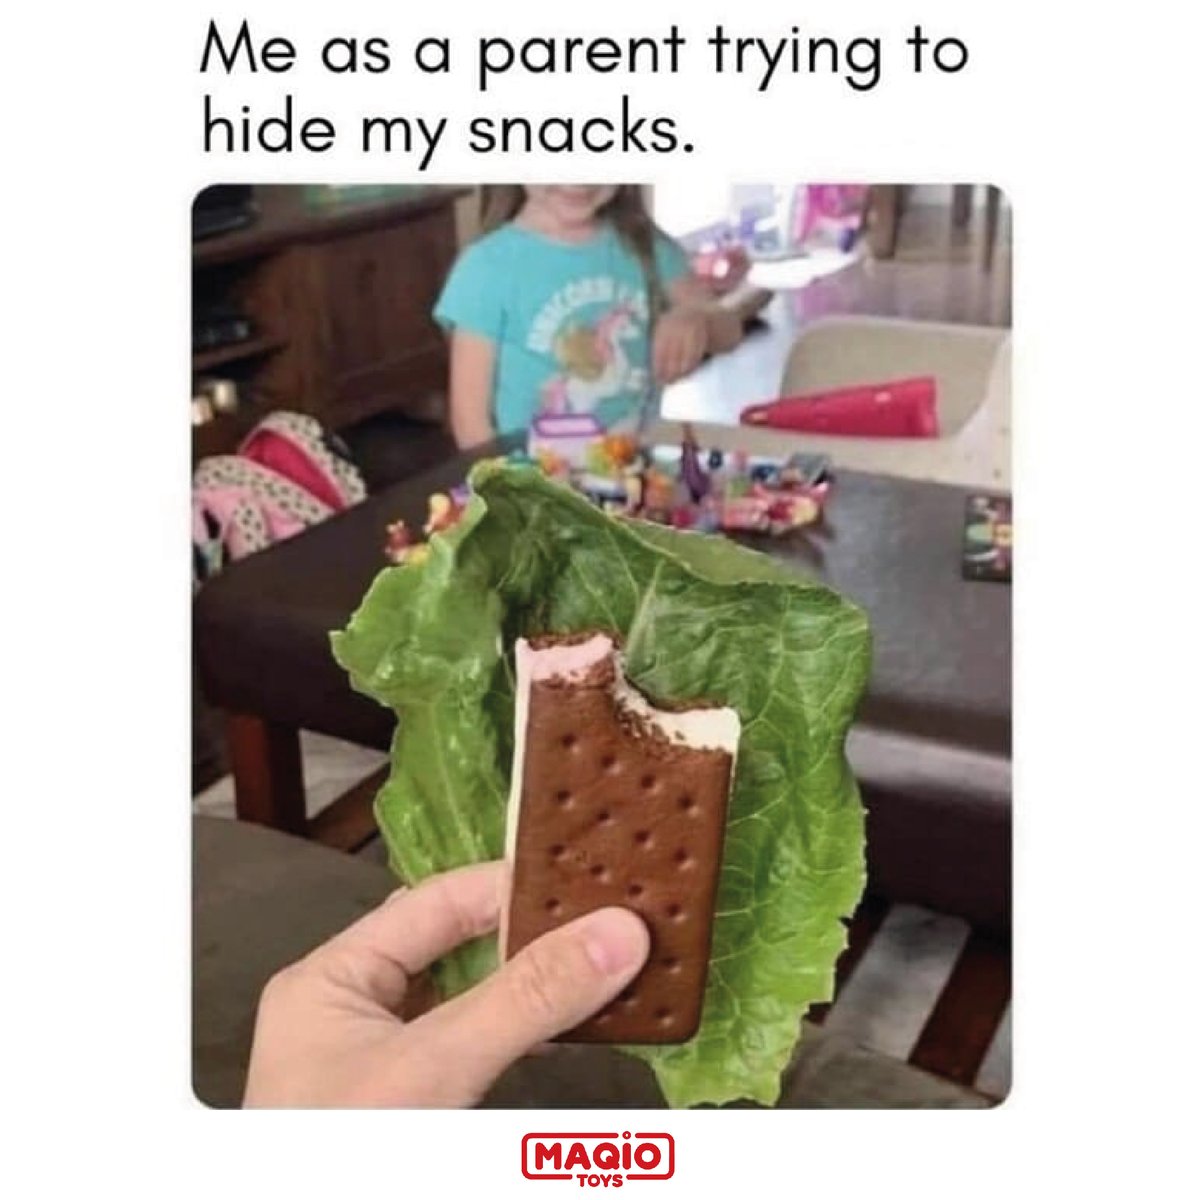 🙈 Hiding snacks from my kids is like playing a never-ending game of hide and seek! No matter how clever I think I am, they always find them! 🙅‍♀️🍫 

.

.

#parenting #parentlife #parentmemes #funnymeme #humor #momlife #mummyblog #relatablememes